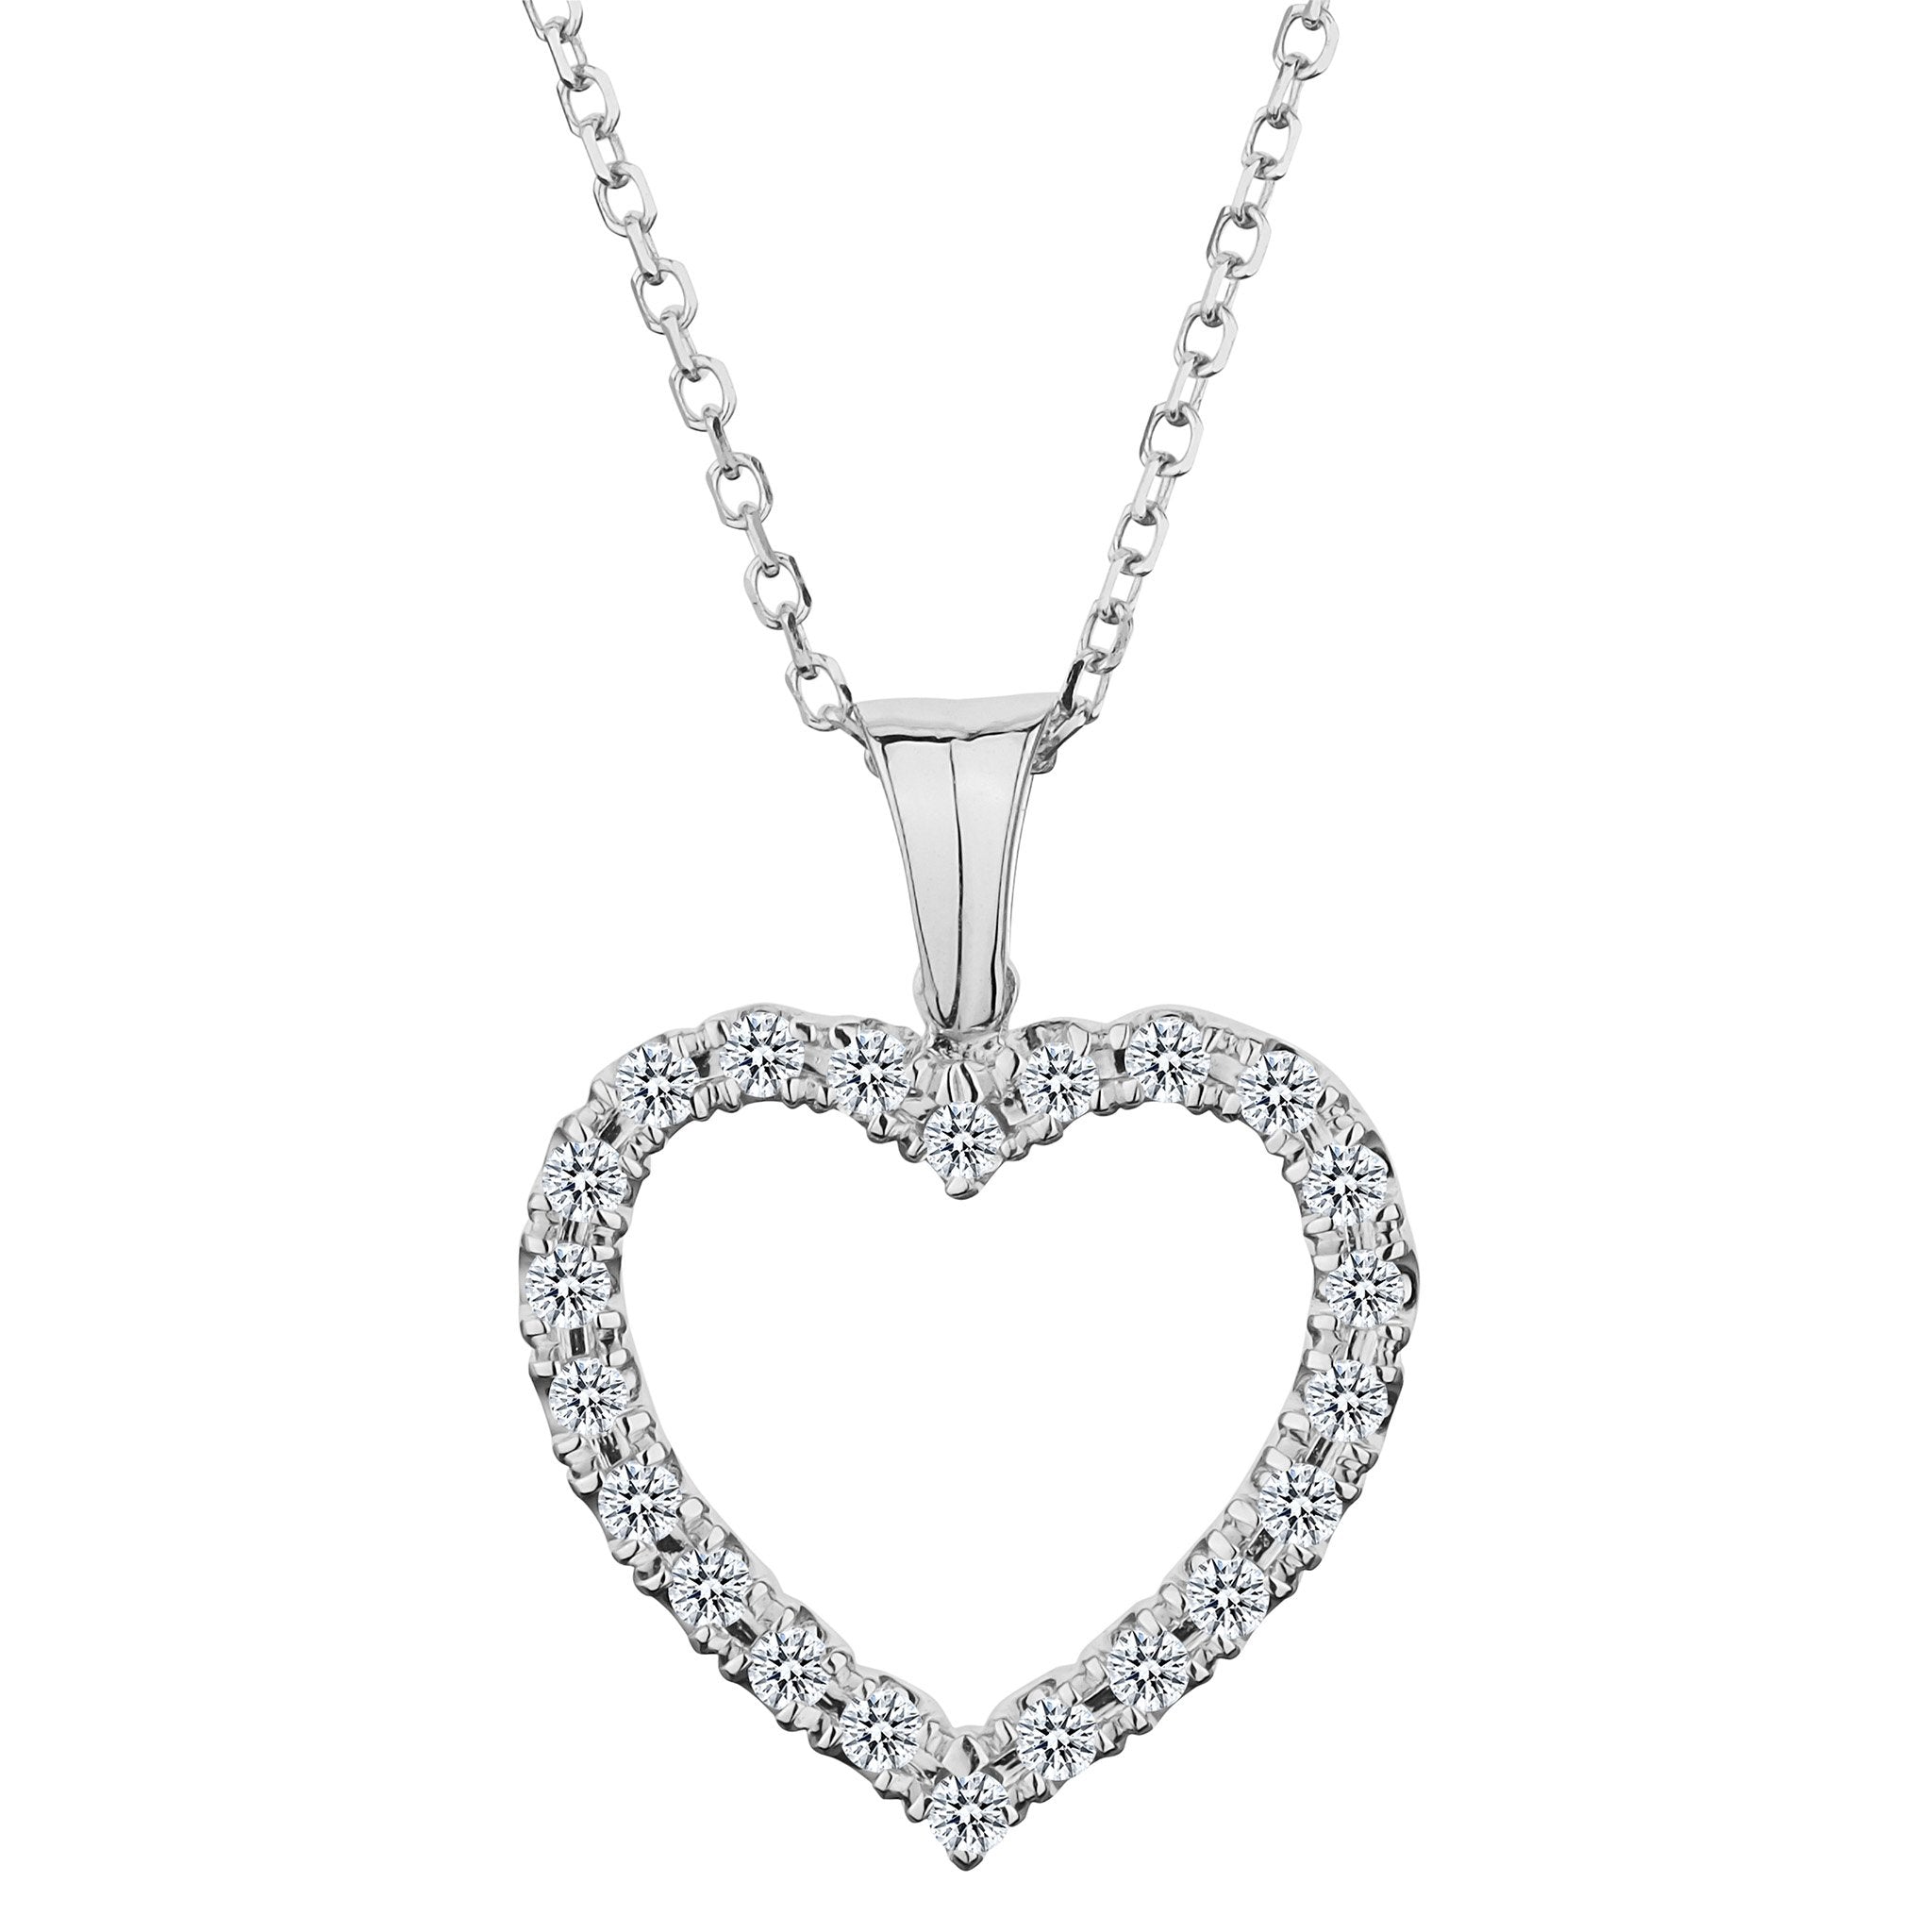 .15 Carat Diamond Pave Heart Pendant,  10kt White Gold. Necklaces and Pendants. Griffin Jewellery Designs.